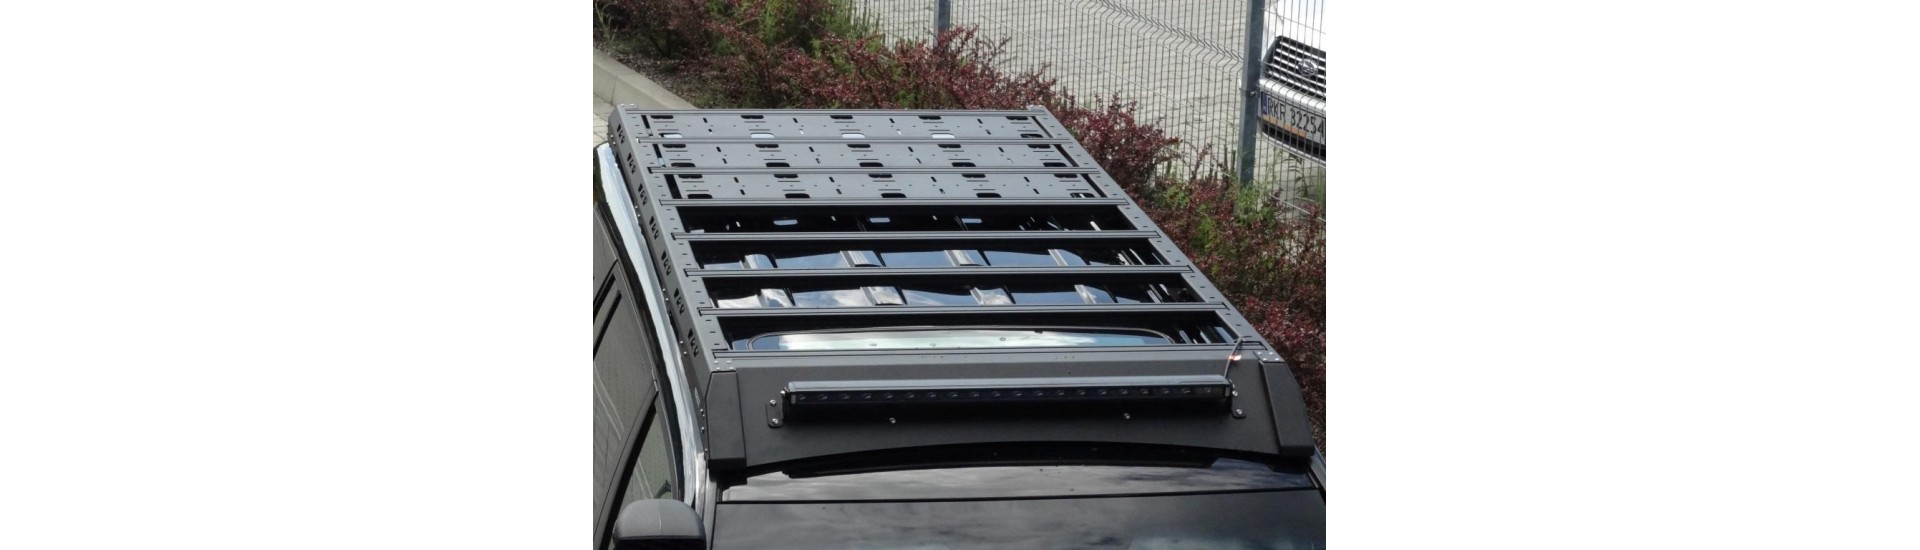 Roof Racks and Ladders